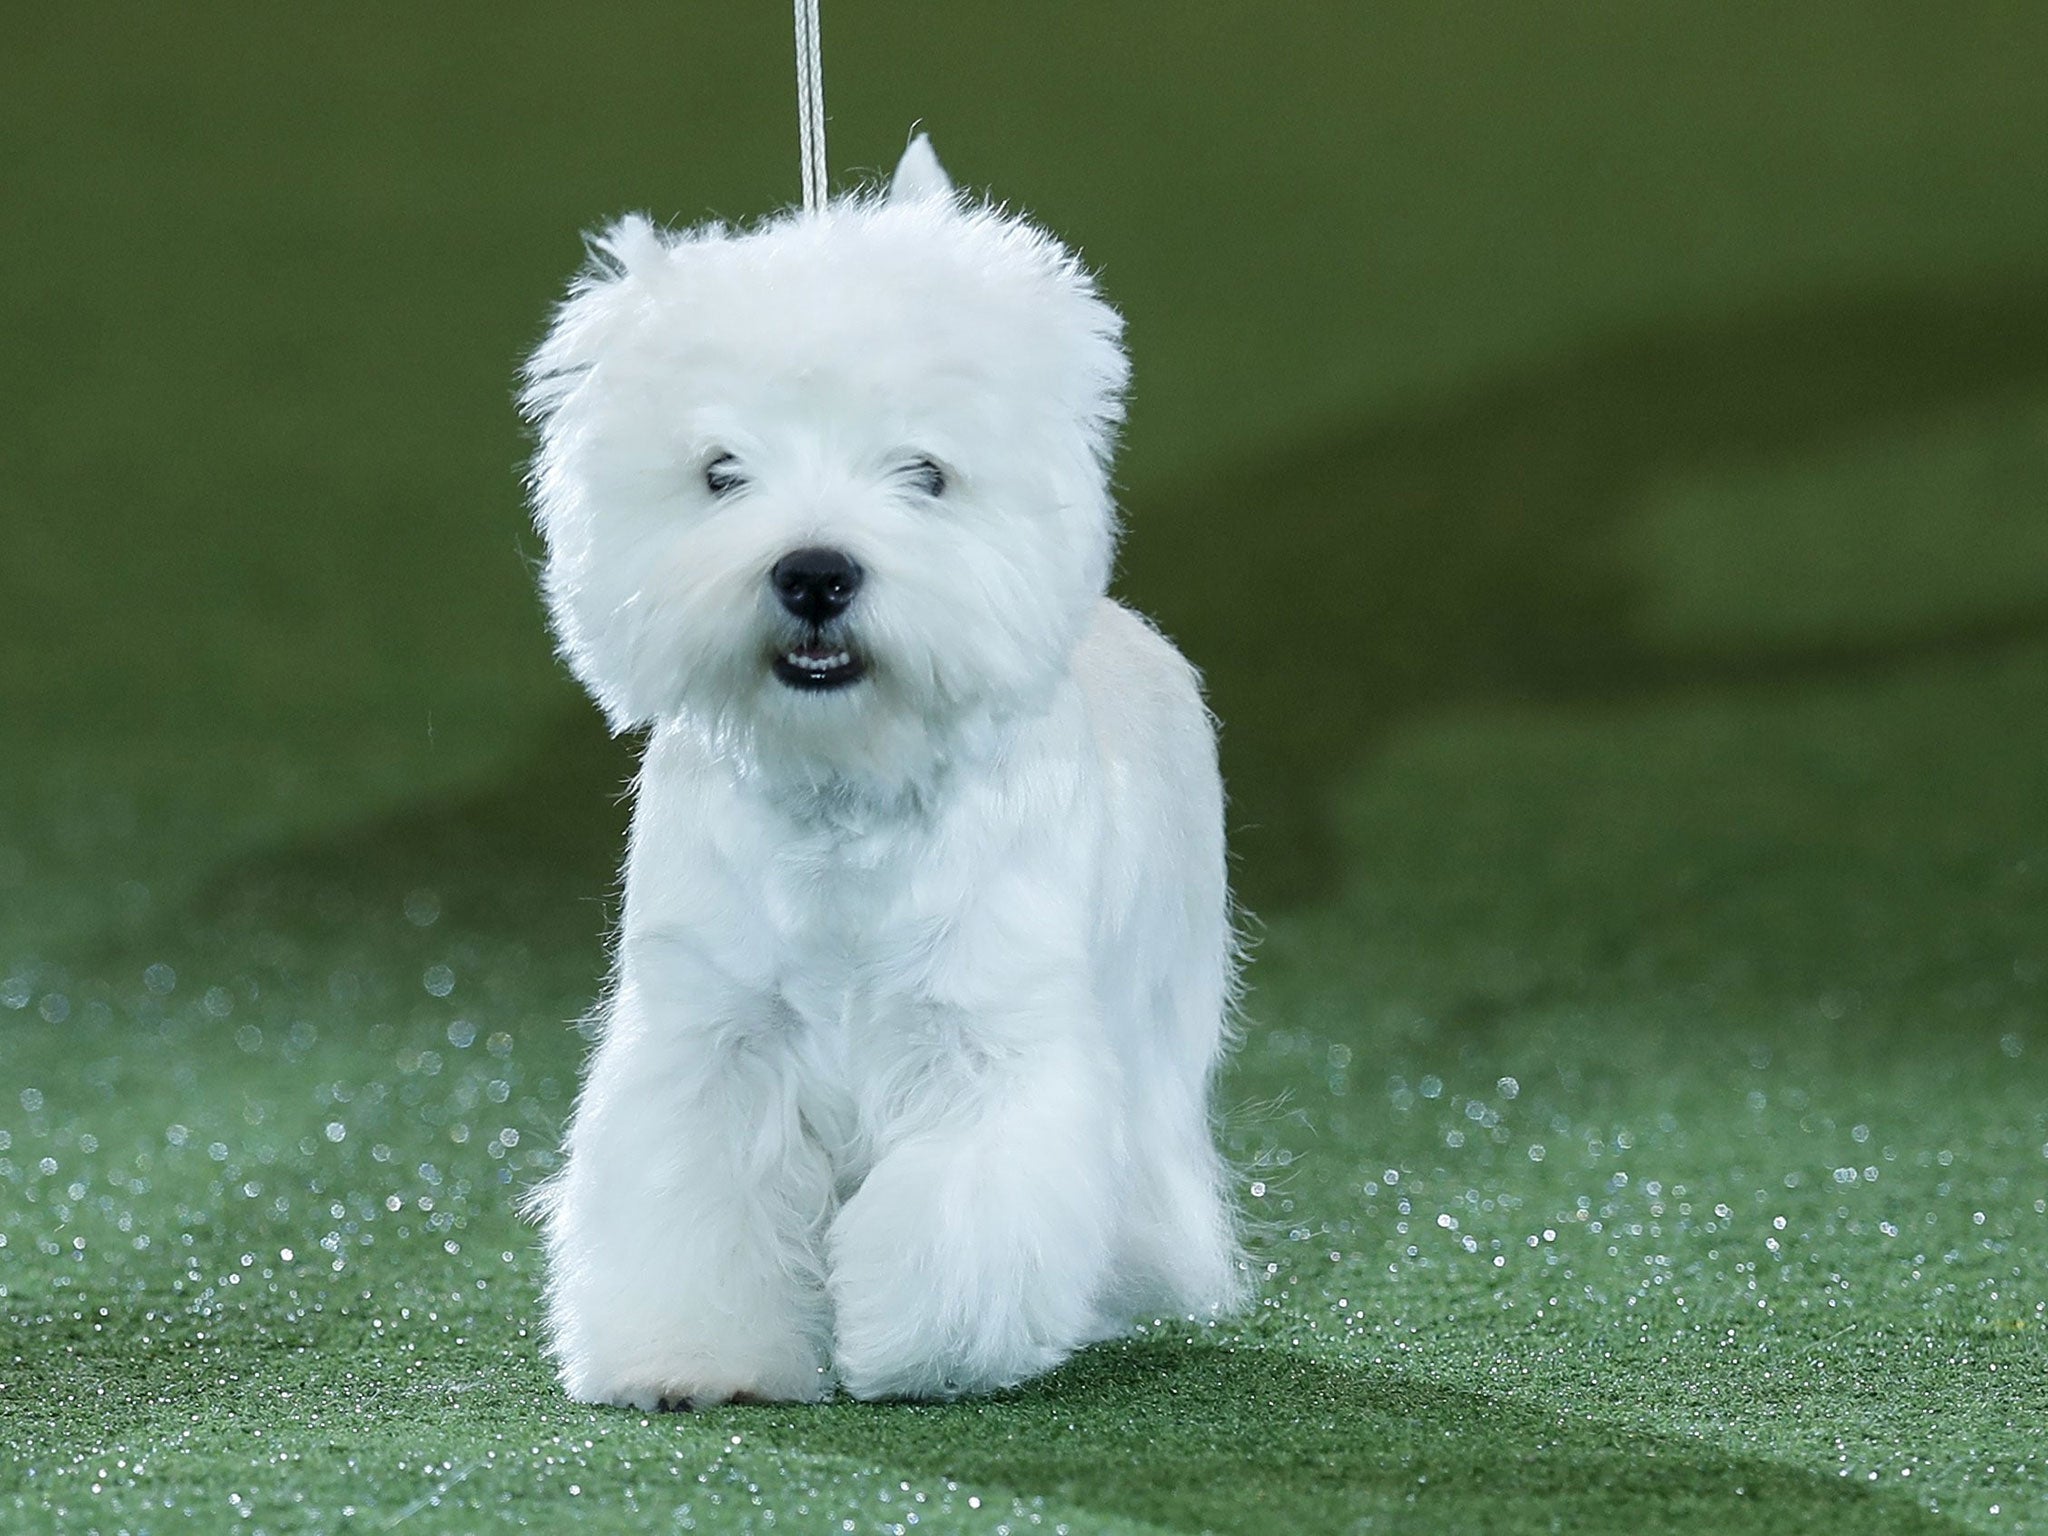 Crufts 2016: West Highland Terrier 'Geordie Girl' wins Best in Show | Home News | News ...2048 x 1536